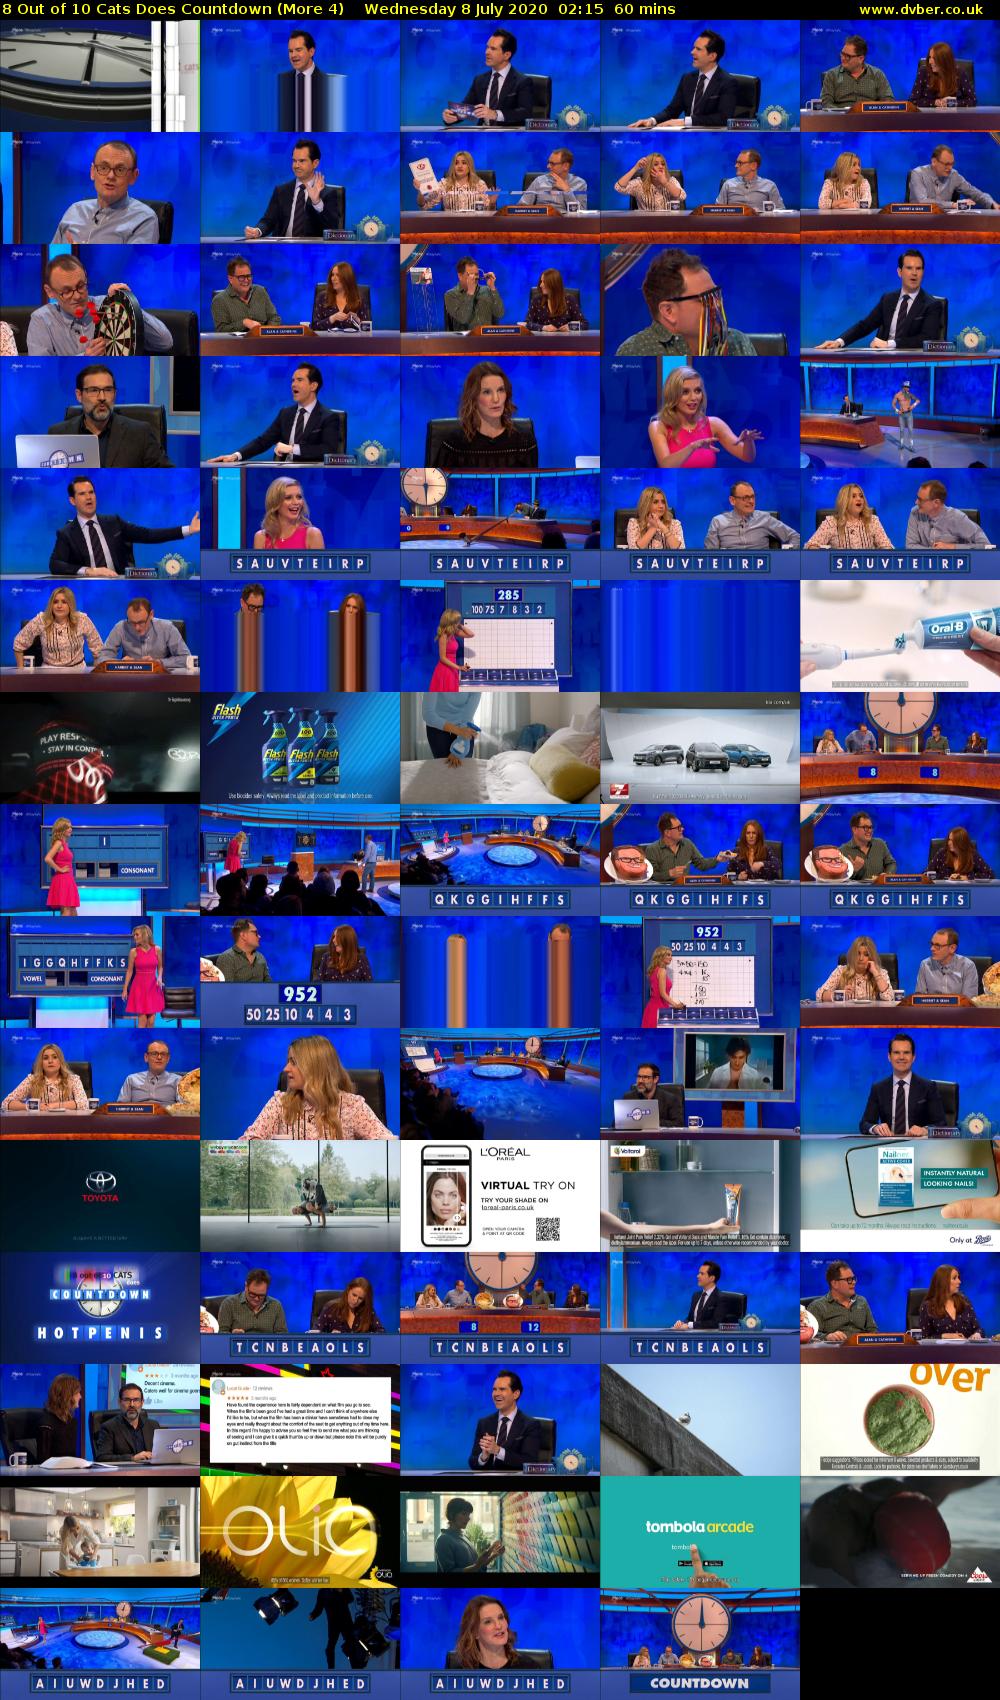 8 Out of 10 Cats Does Countdown (More 4) Wednesday 8 July 2020 02:15 - 03:15